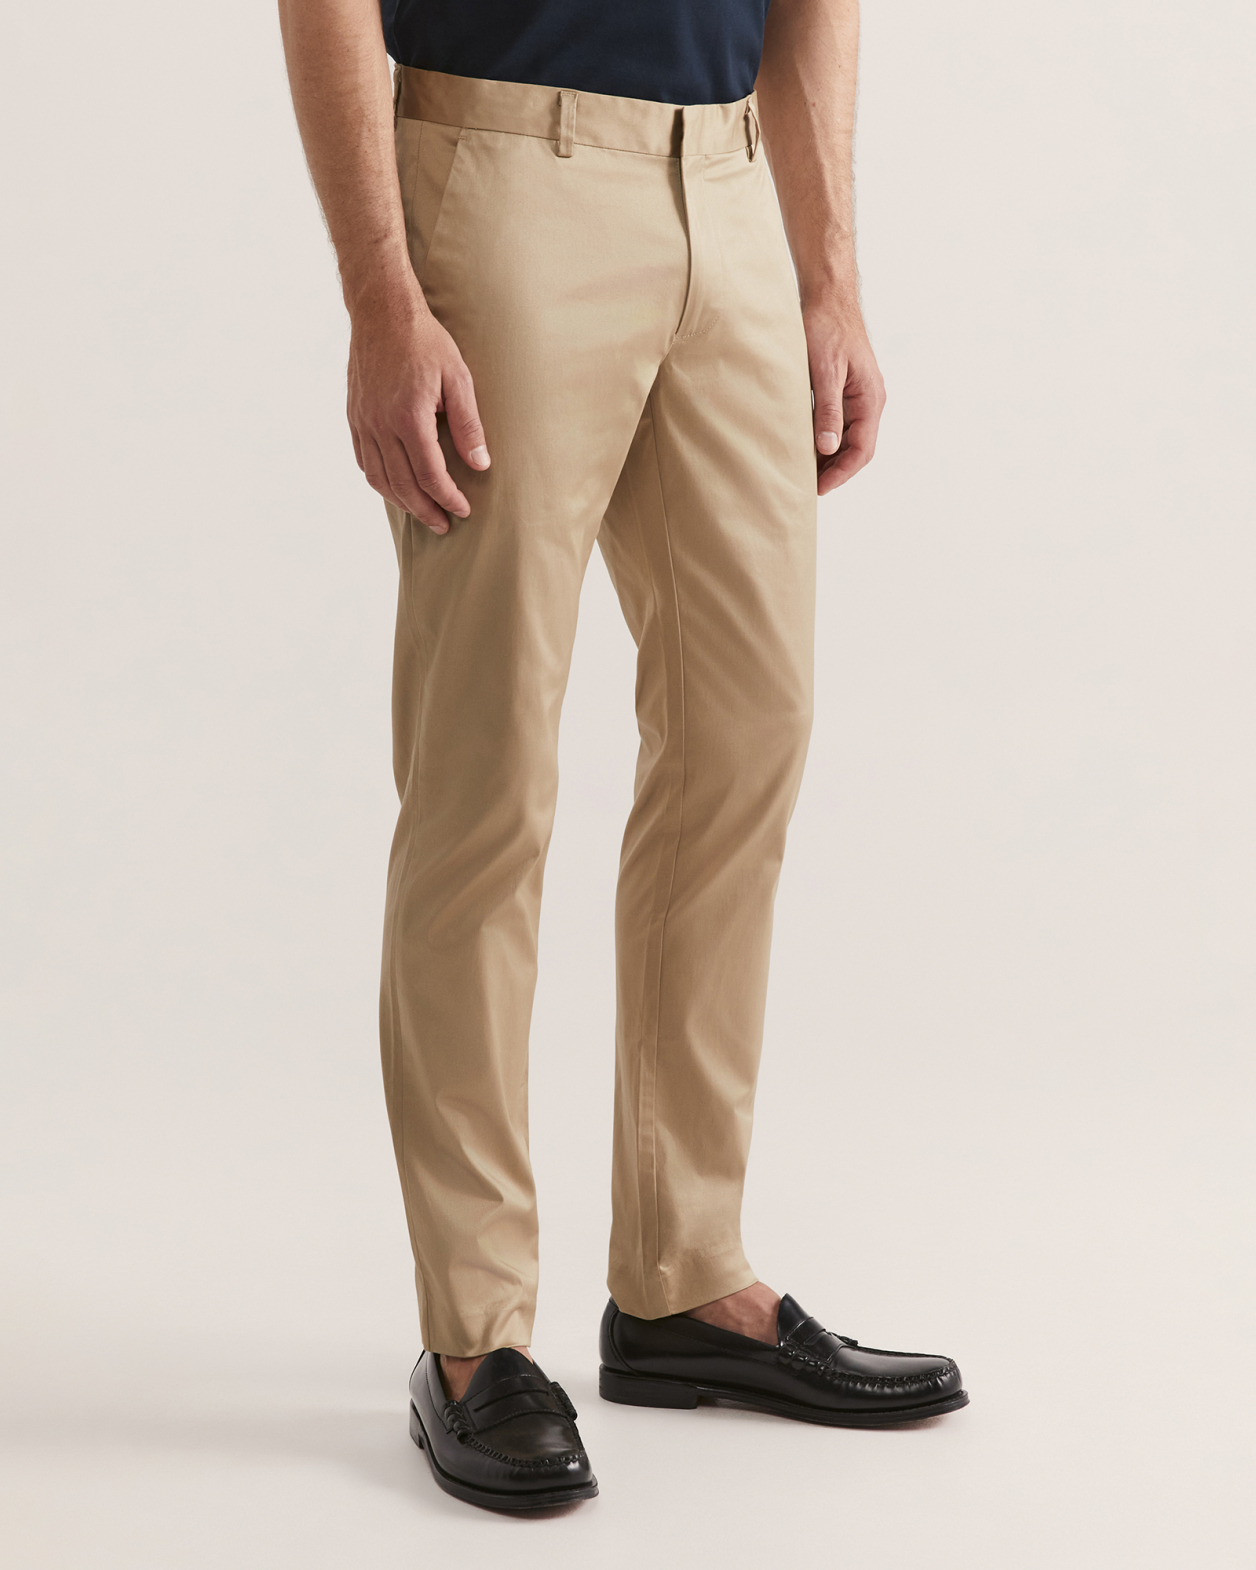 Baxter Slim Chino Pant in SAND